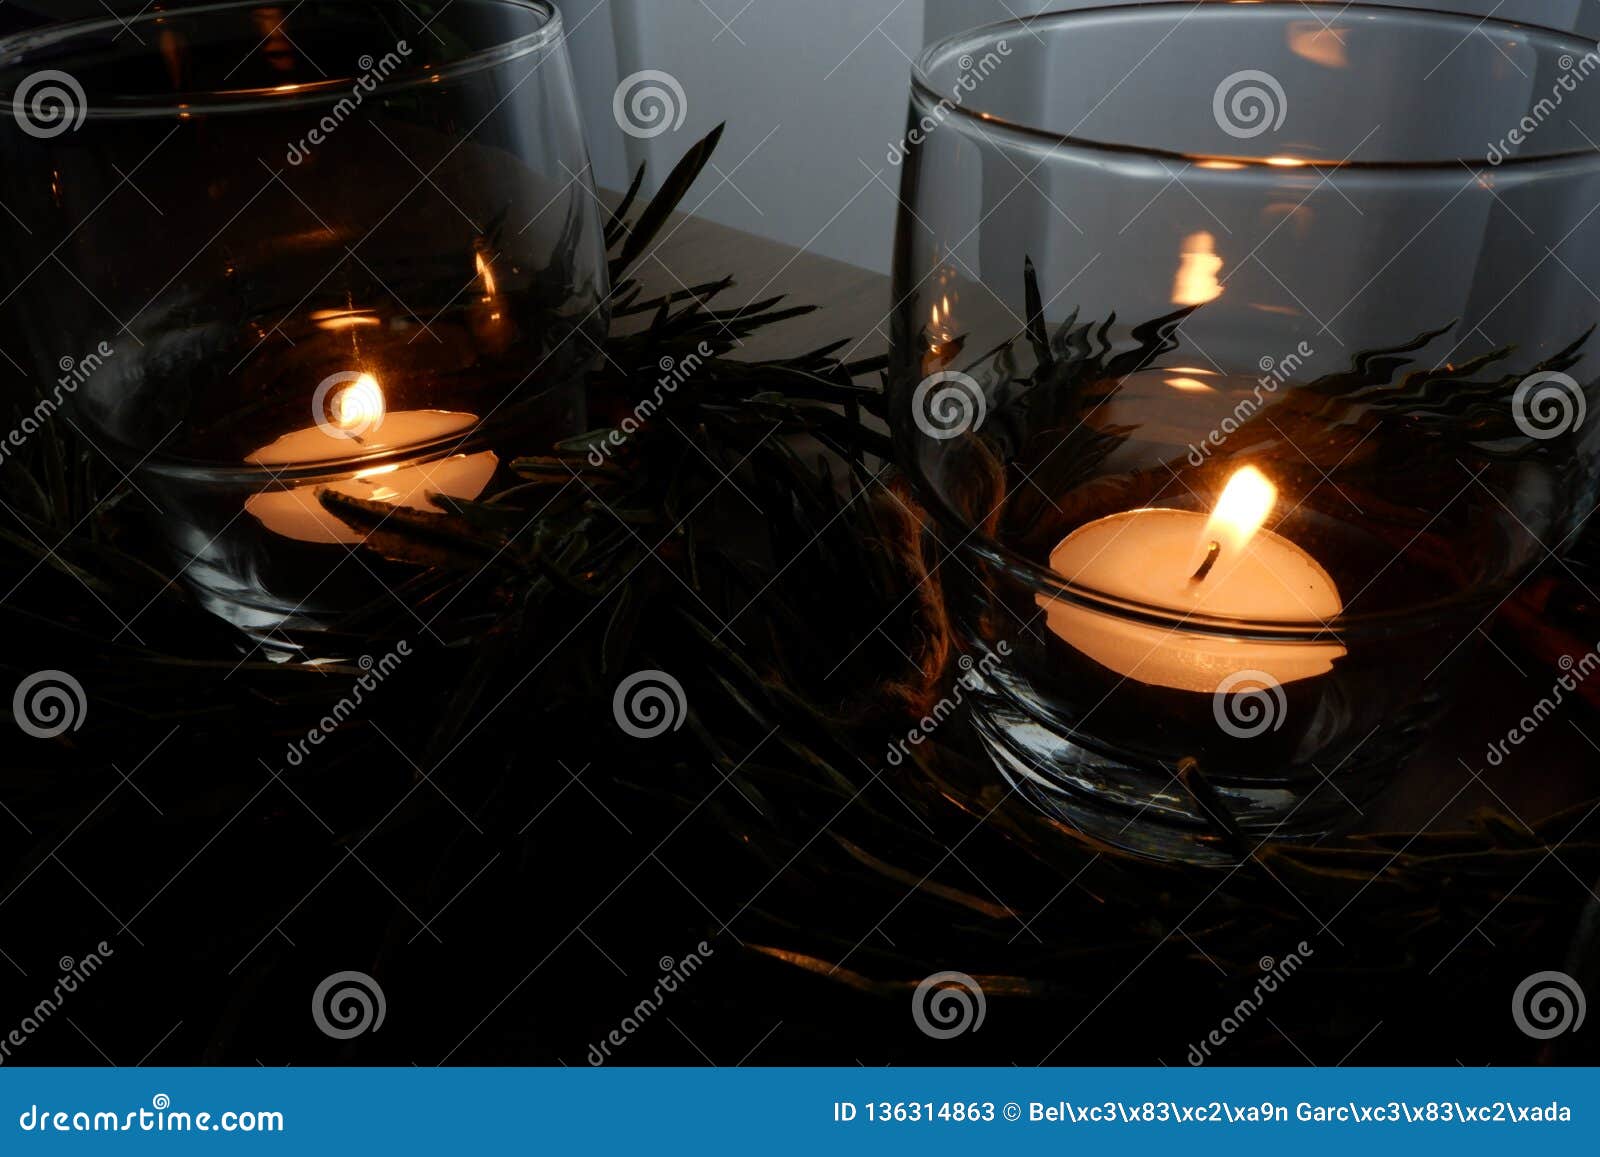 Candles for a Warm Illumination Stock Image - Image of candles, warm ...